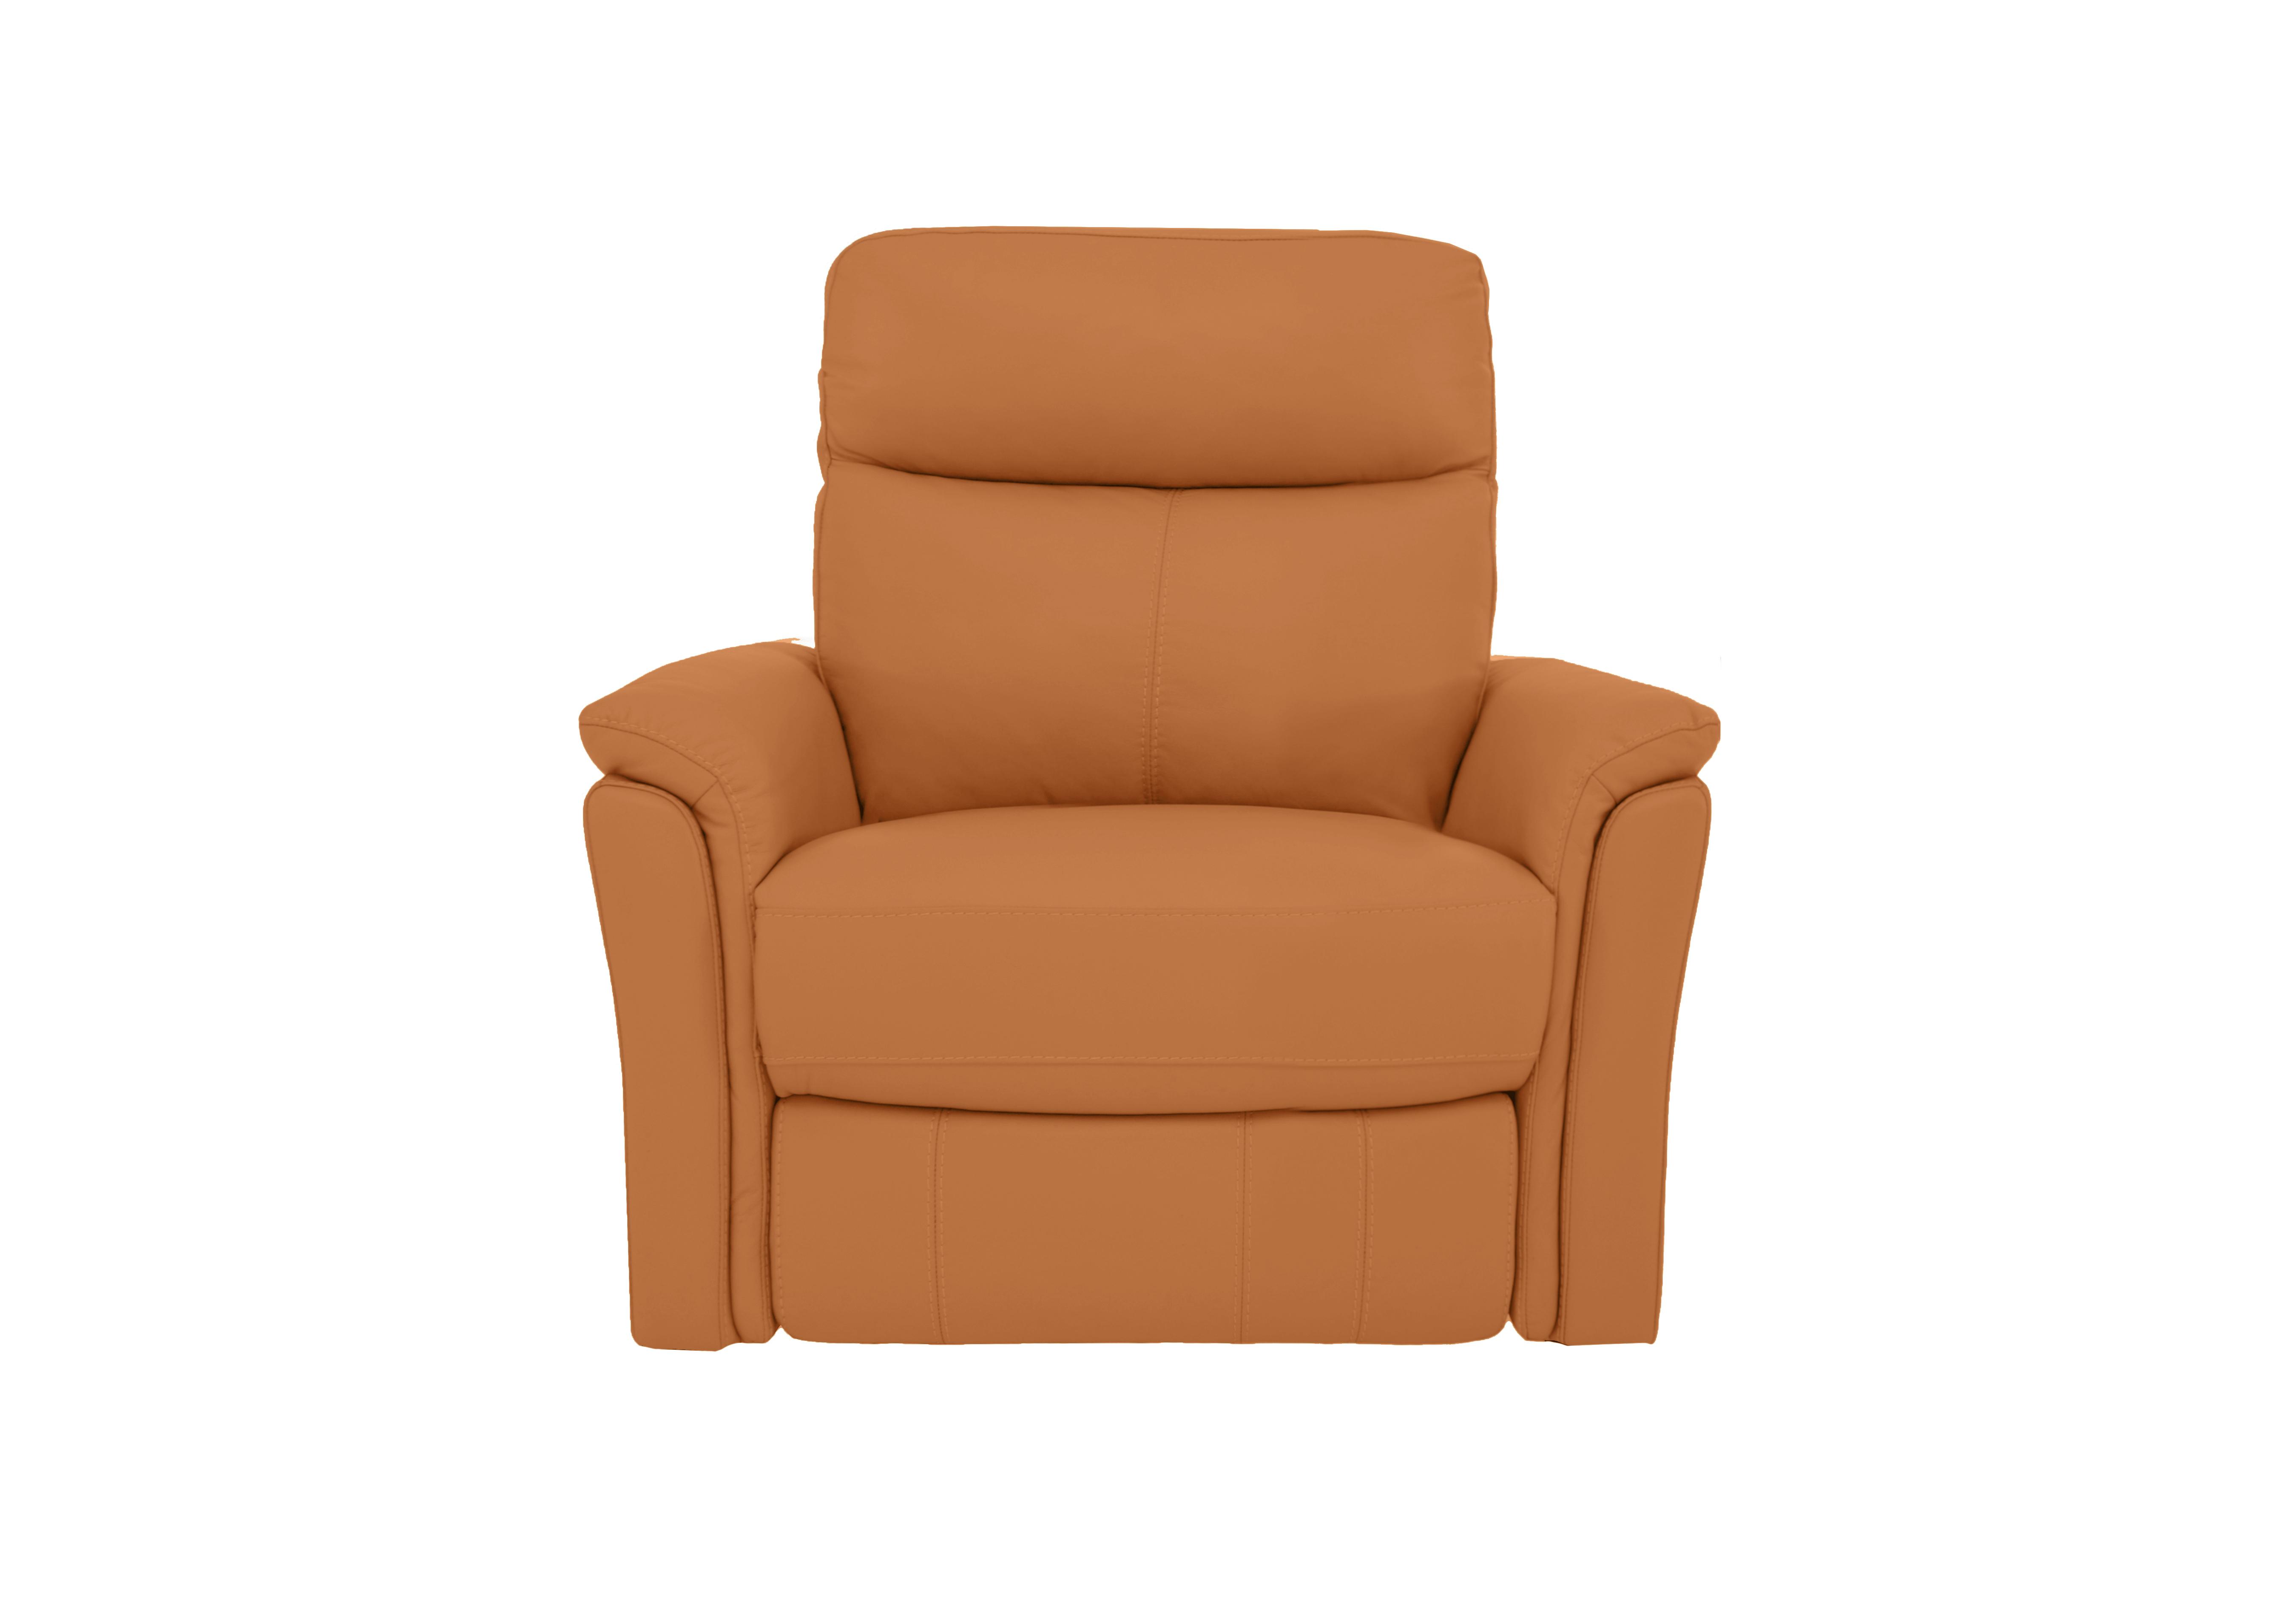 Compact Collection Piccolo Recliner Armchair in Bv-335e Honey Yellow on Furniture Village